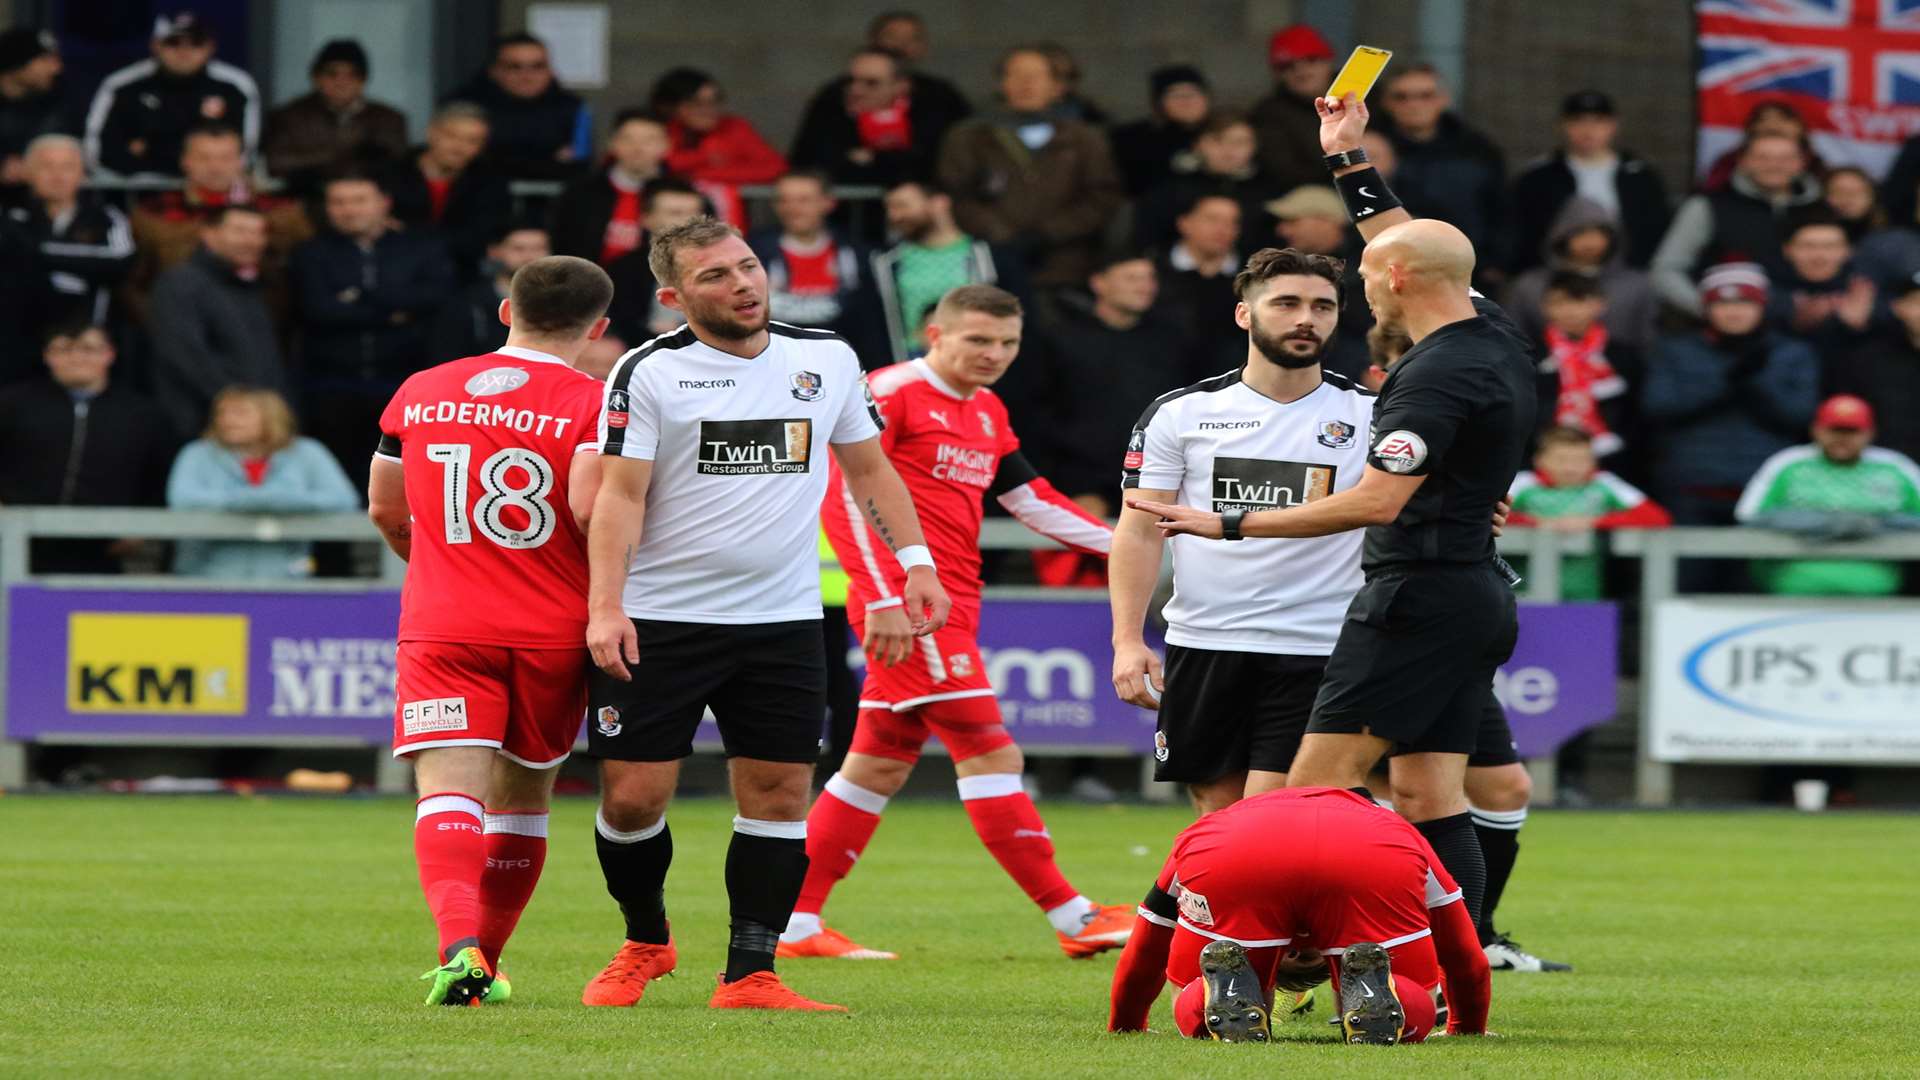 Dartford lost 5-1 at home to Swindon in the FA Cup first round Picture: Andy Jones